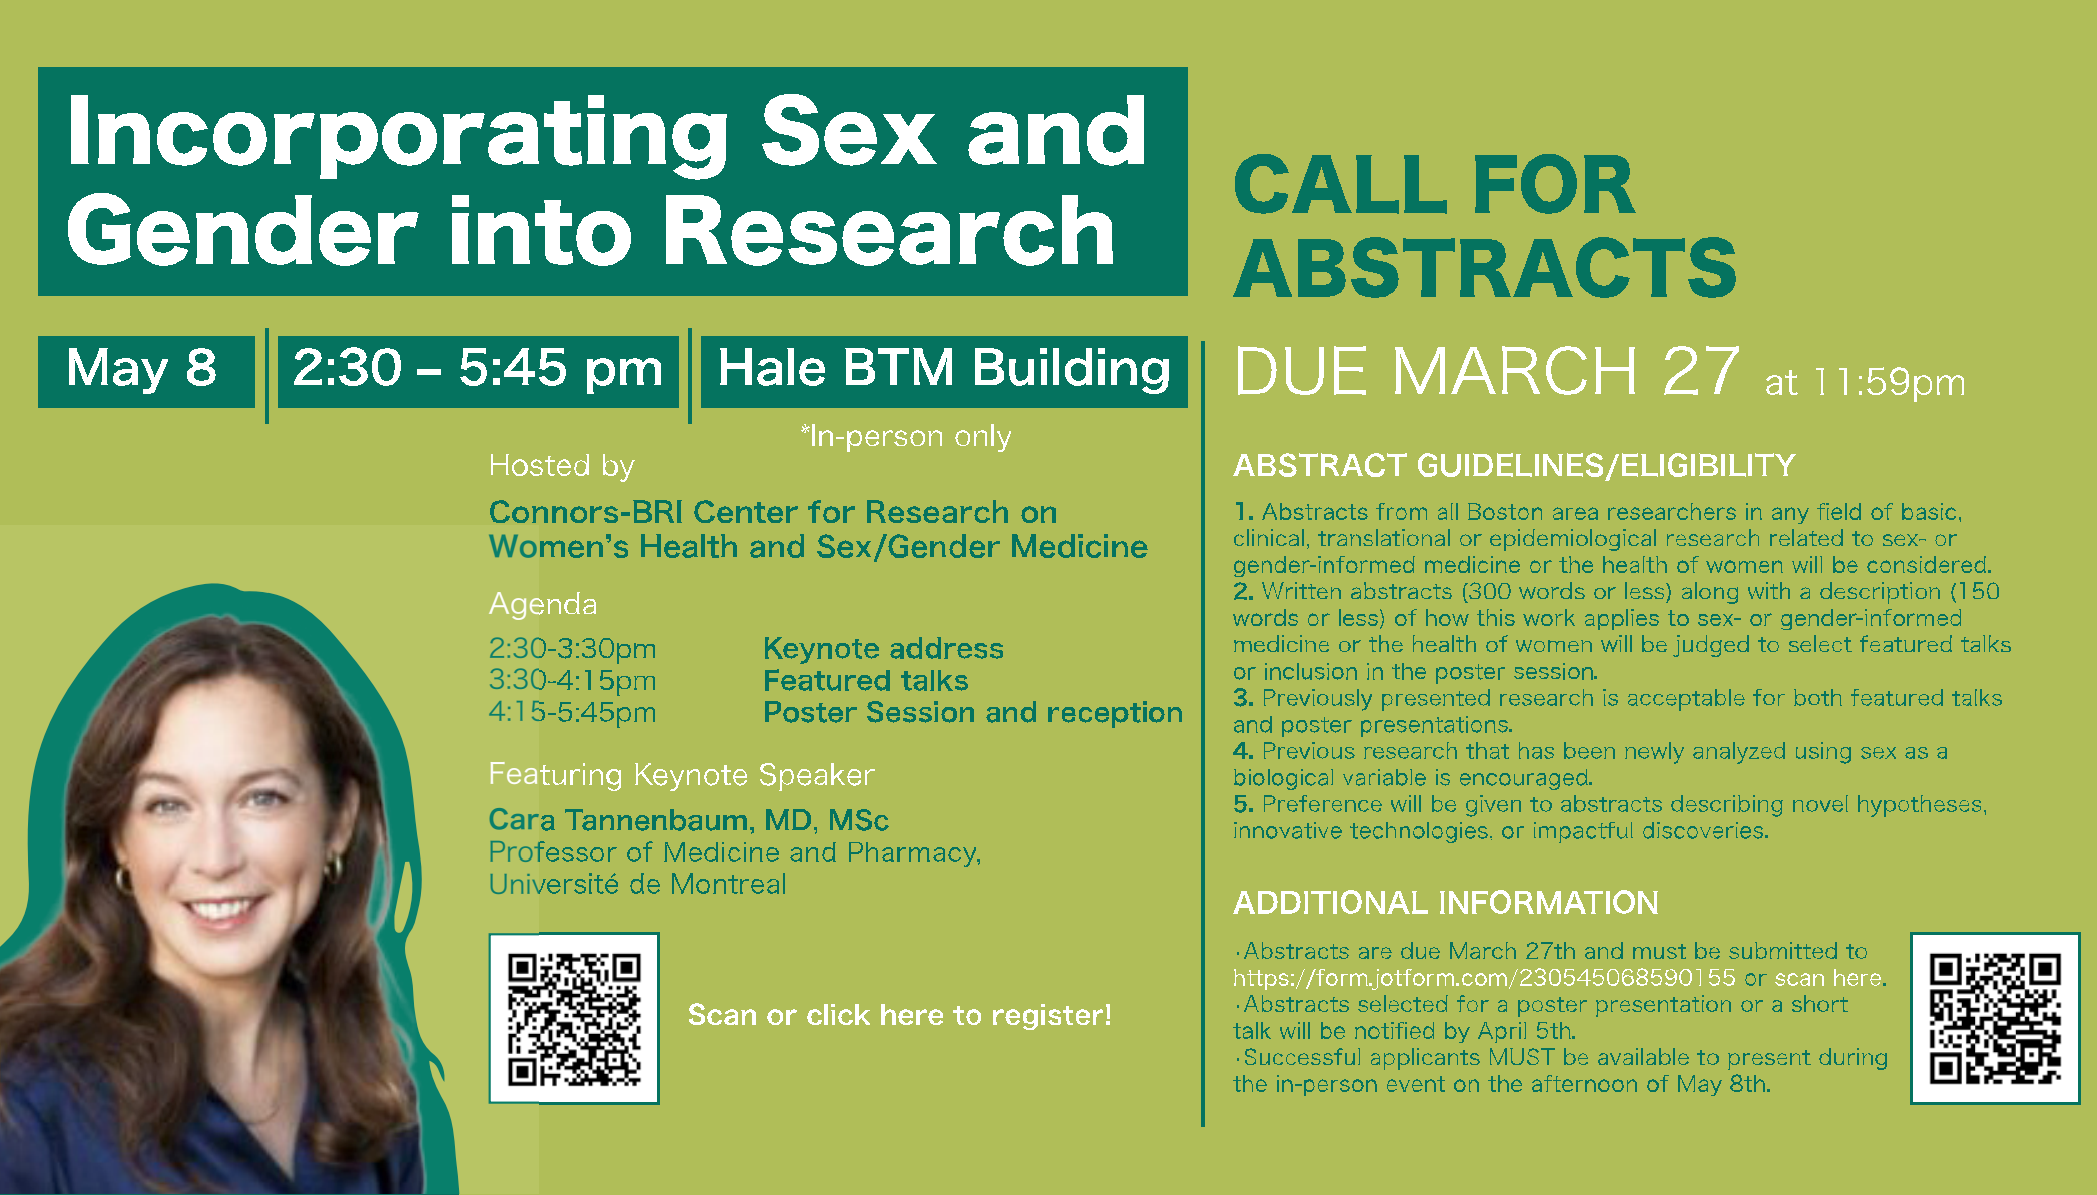 Incorporating Sex and Gender into Research_flyer7.0